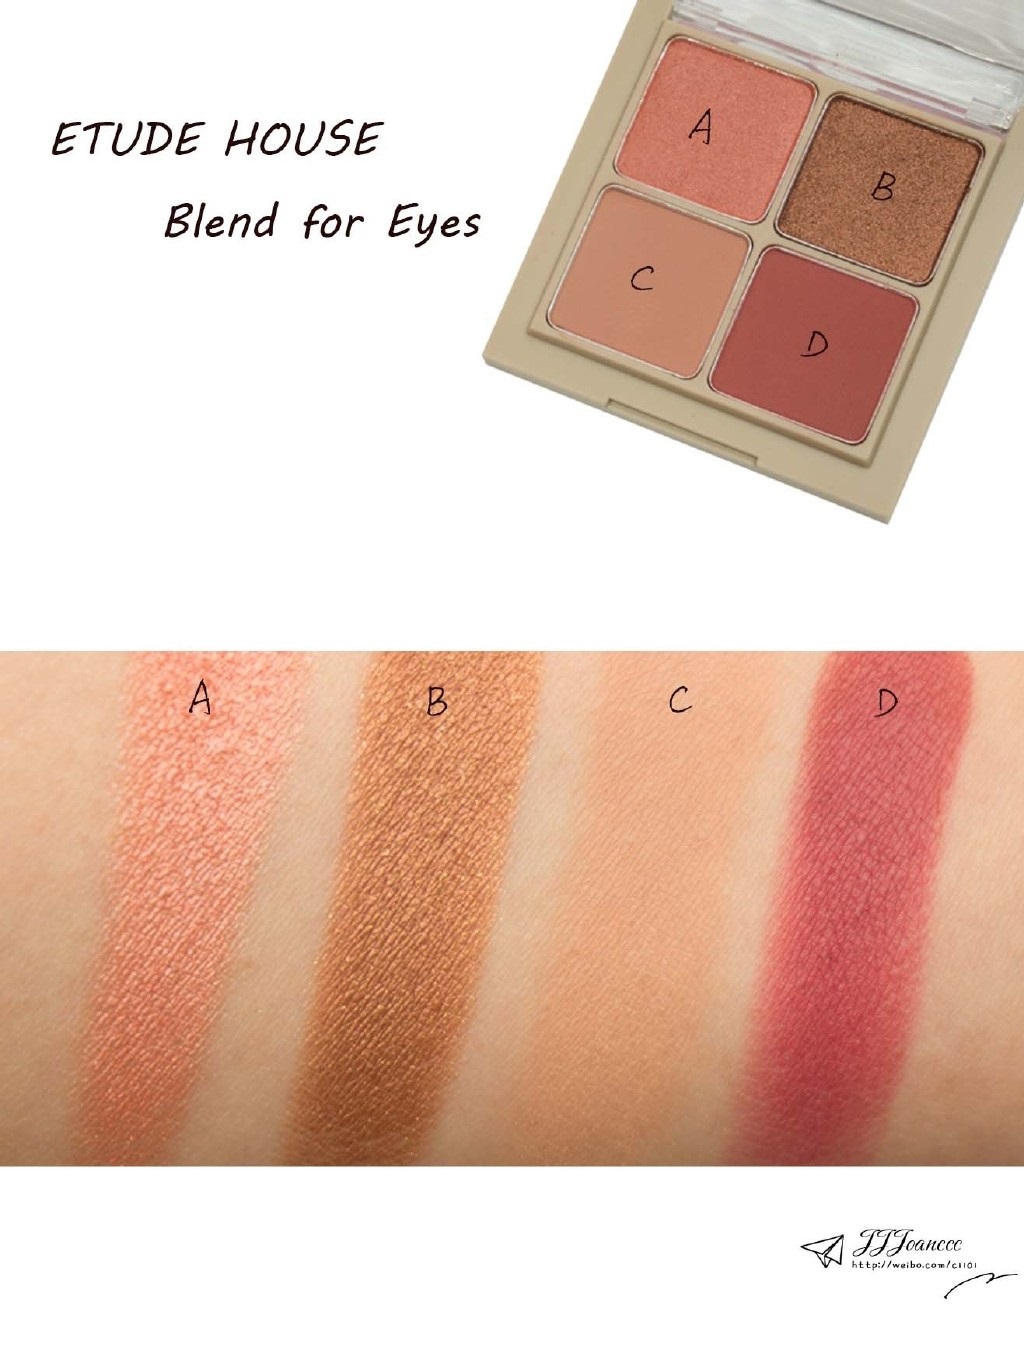 ETUDE HOUSE Blend for Eyes 爱丽小屋四色眼影01盘试色+画法